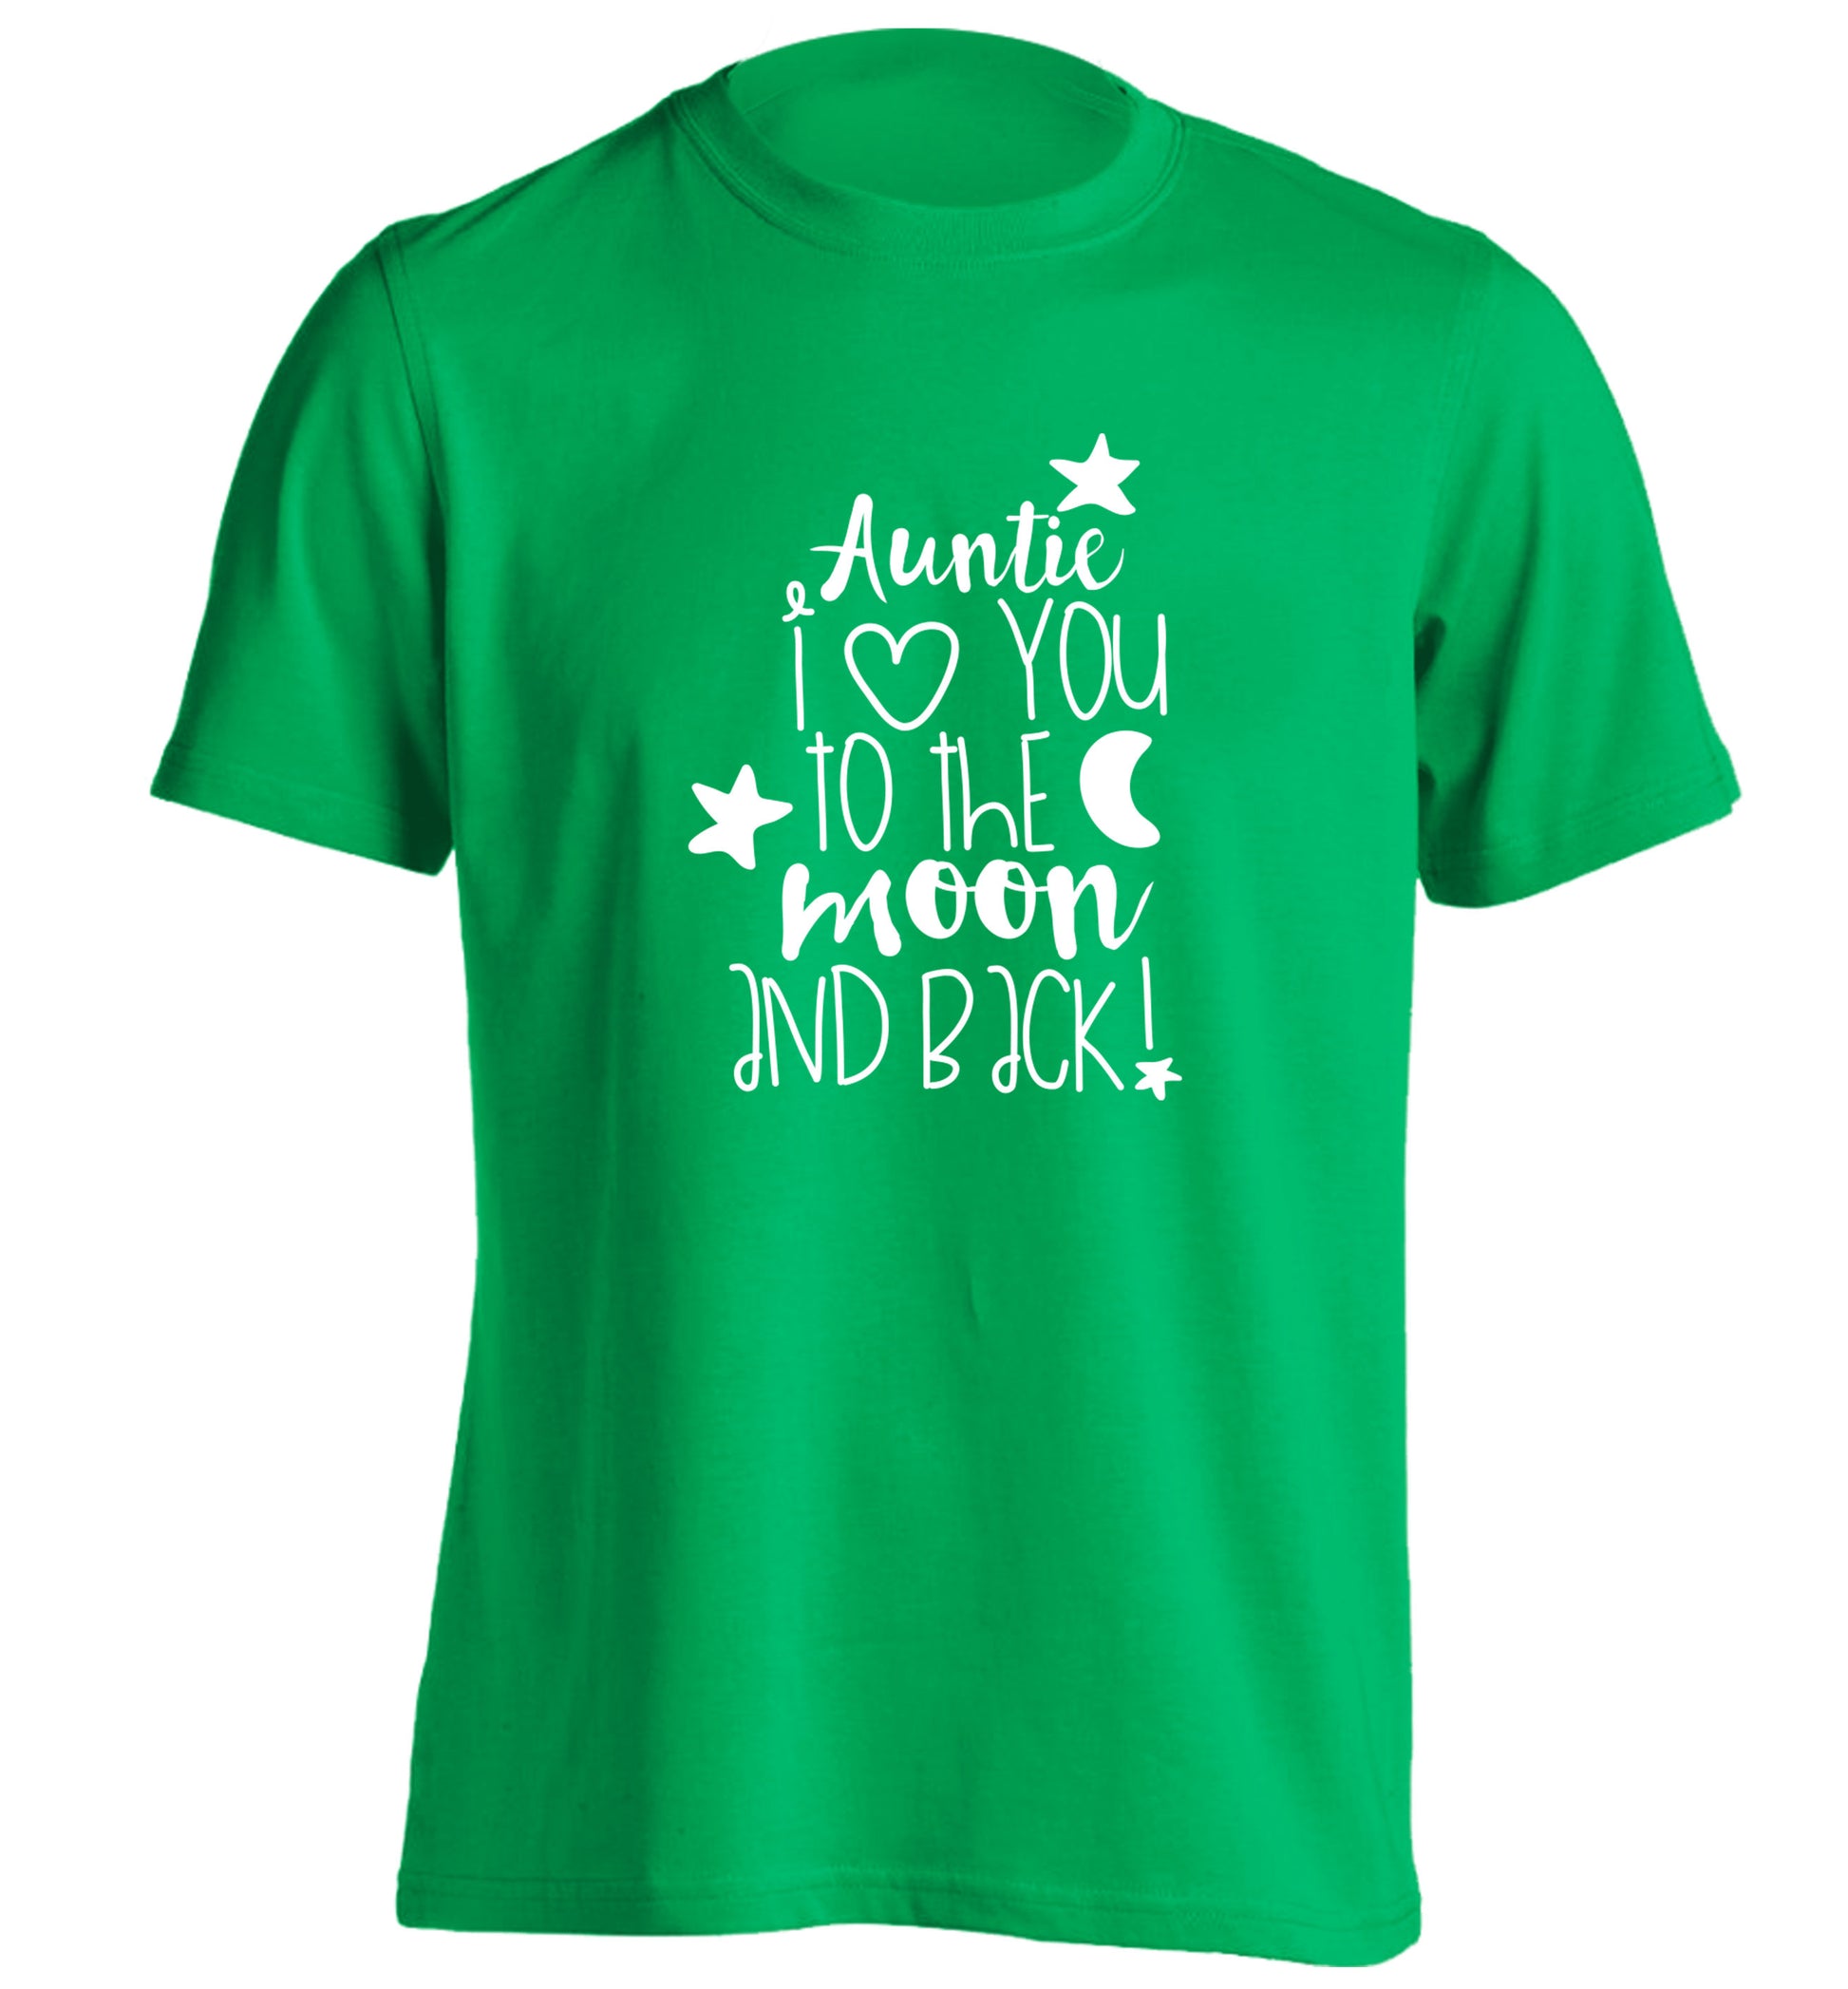 Auntie I love you to the moon and back adults unisex green Tshirt 2XL